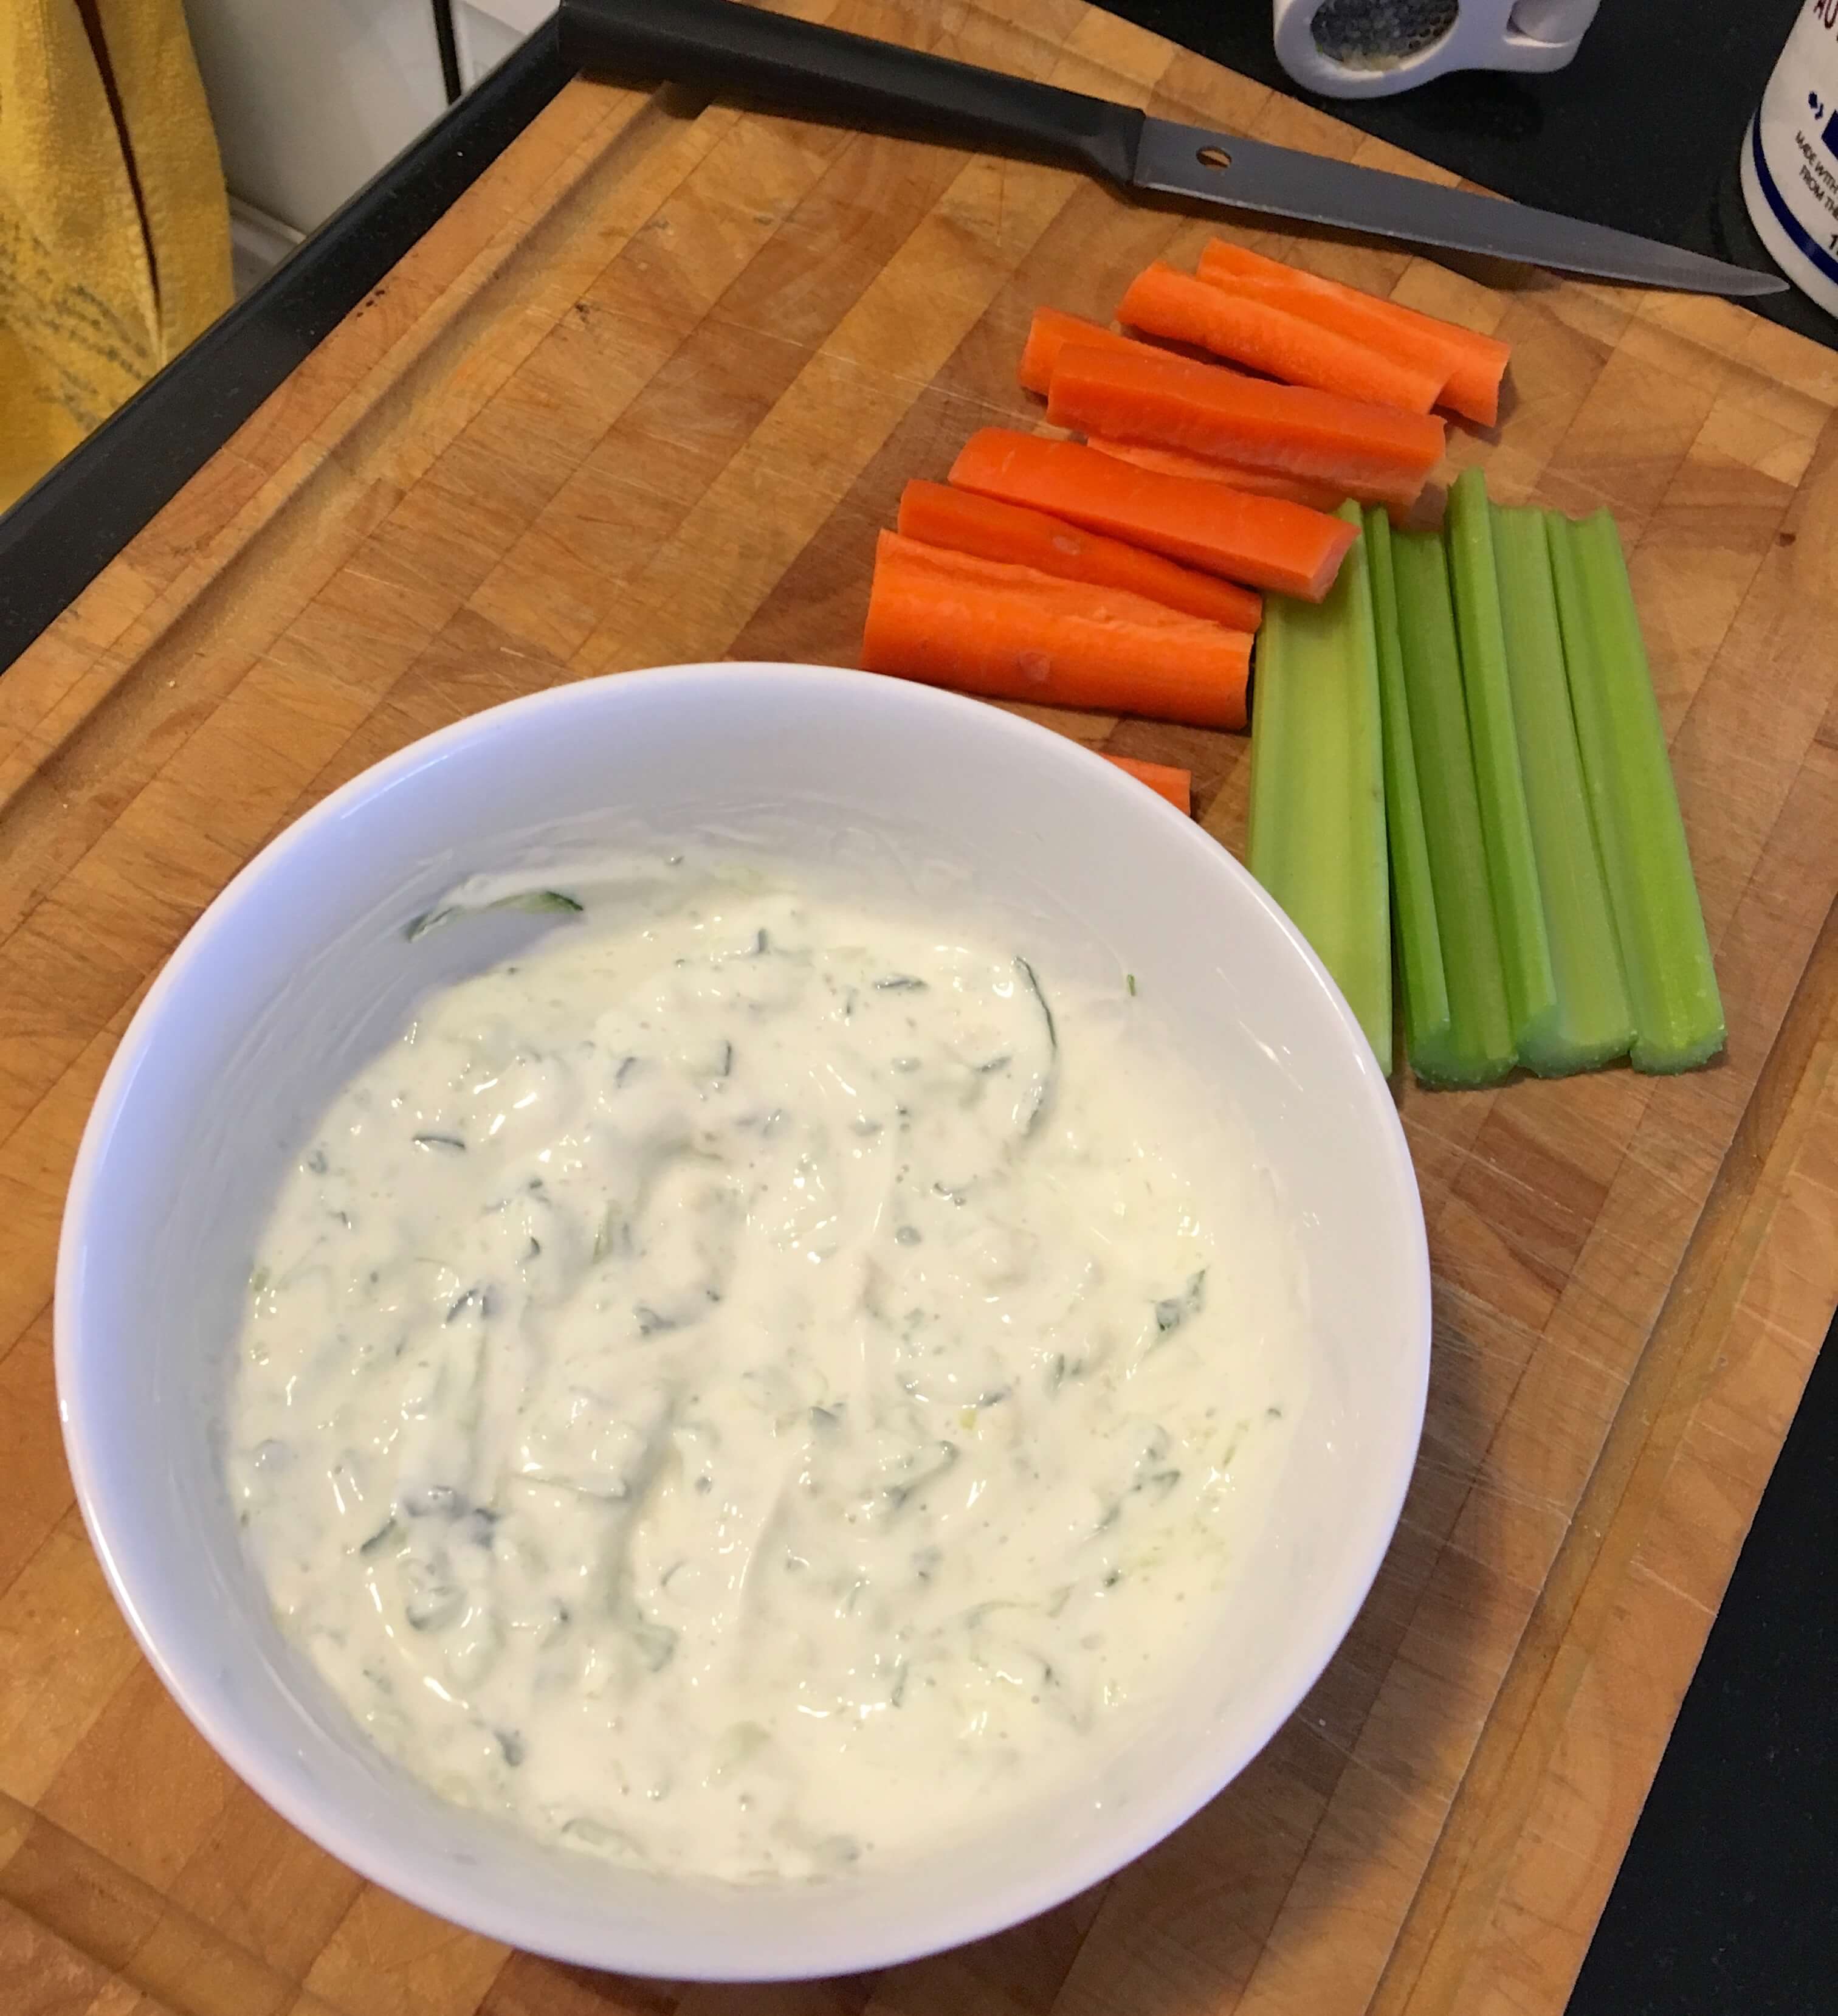 tzatziki dip in a bowl with carrot and celery sticks